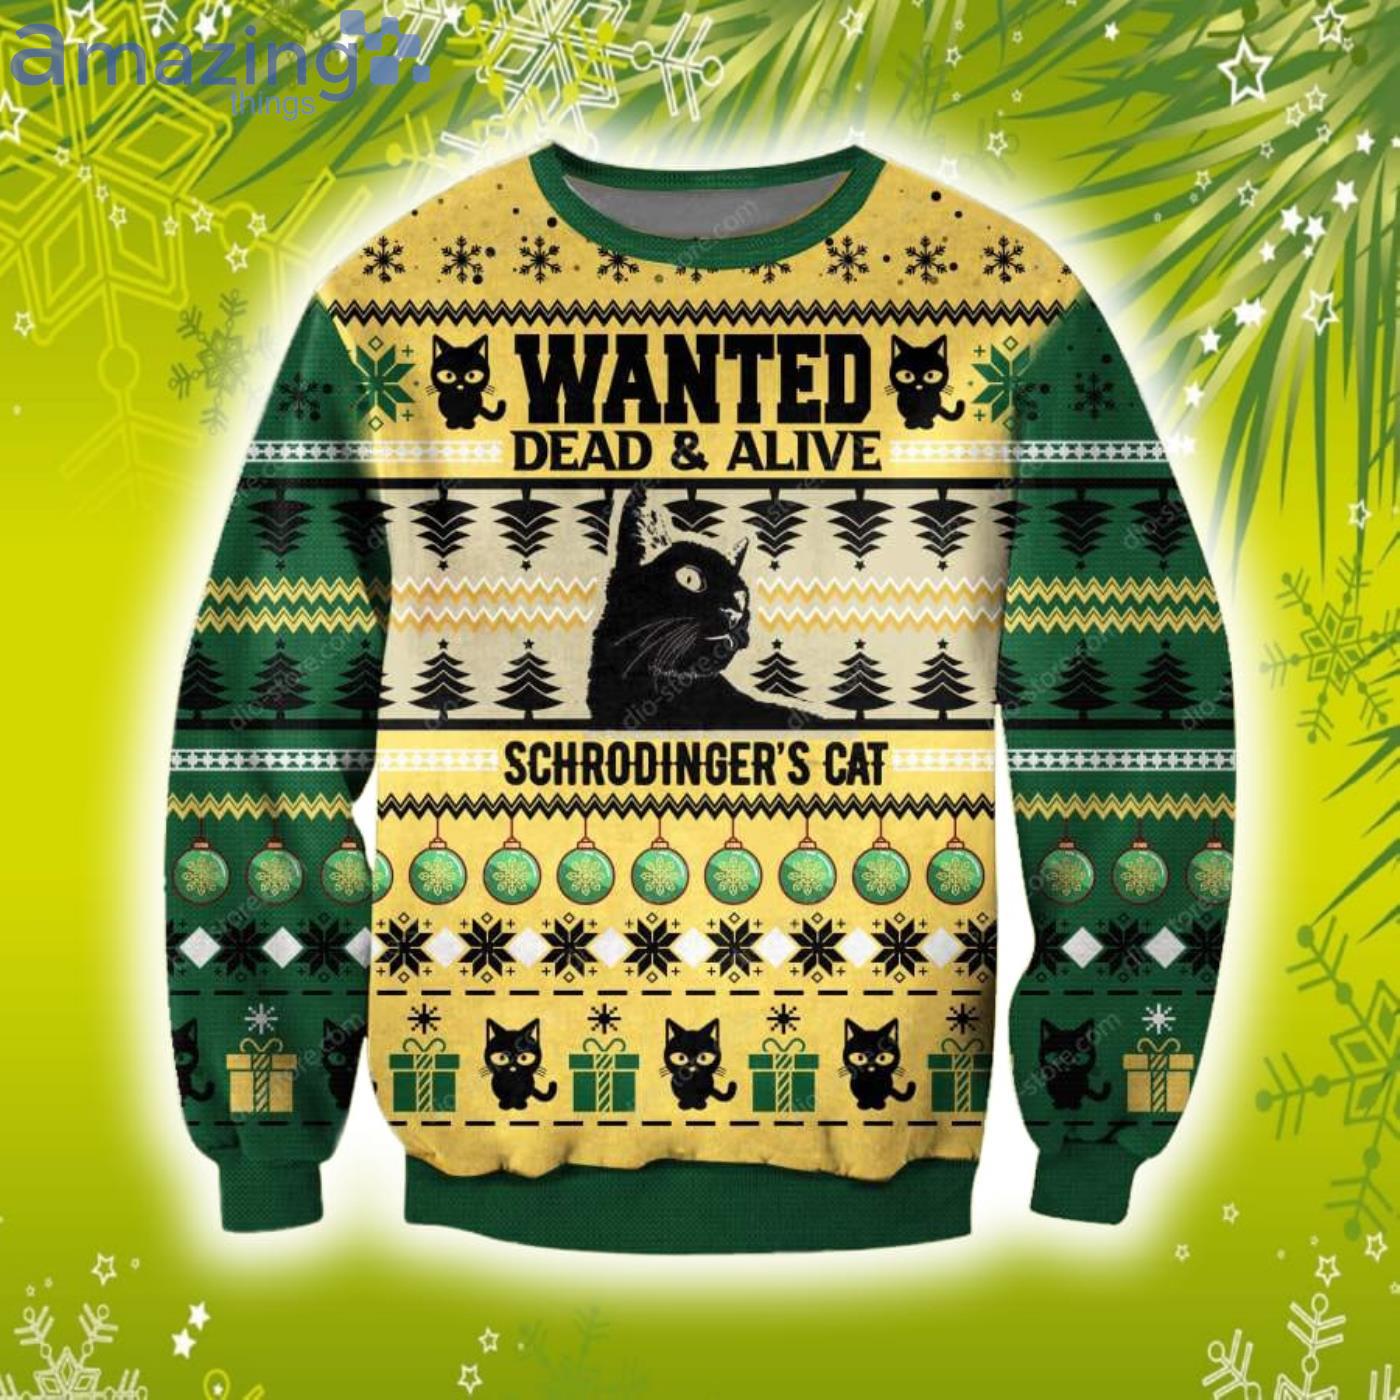 Wanted Dead & Alive Schrodingers Cat 3D Christmas Knitting Pattern Ugly Sweater Sweatshirt Product Photo 1